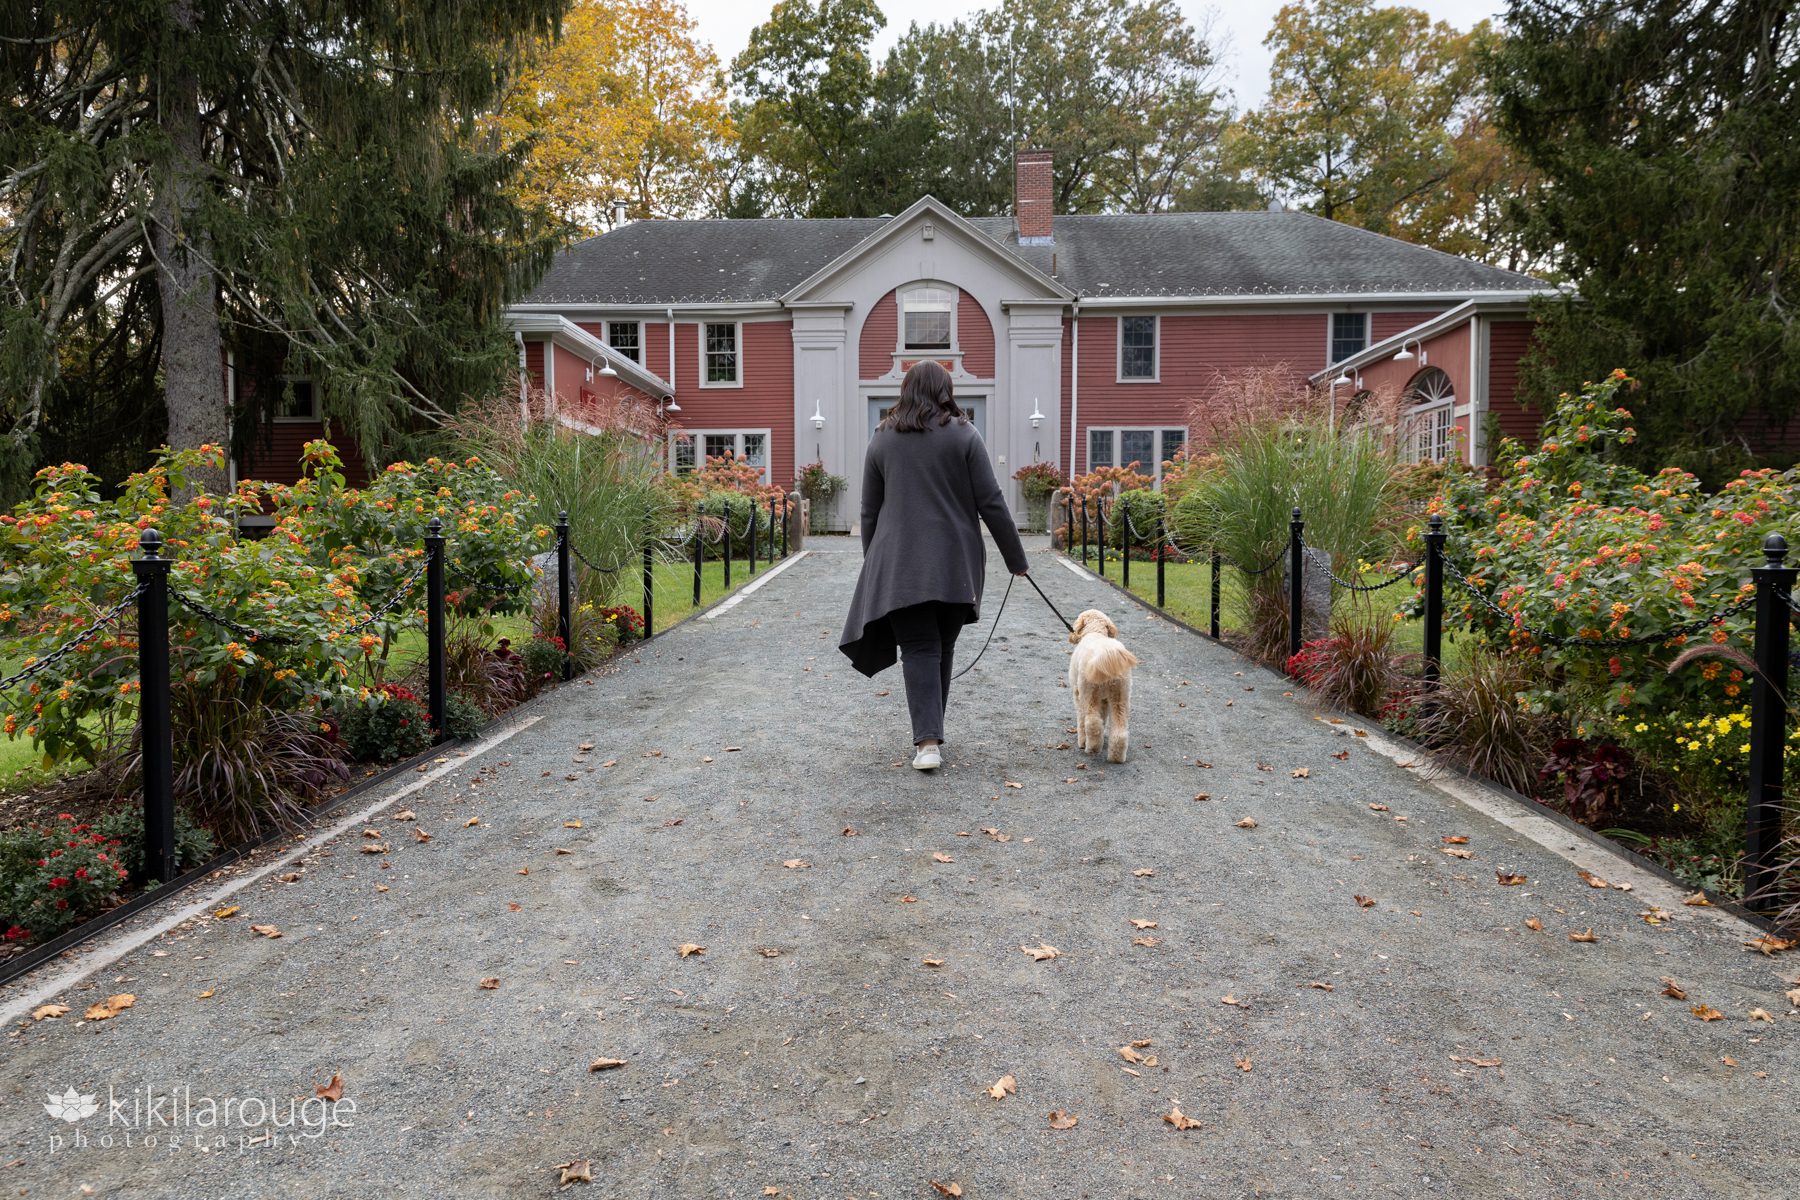 Woman walking way with long gray sweater coat and labradoodle dog with leather leash towards a big red building